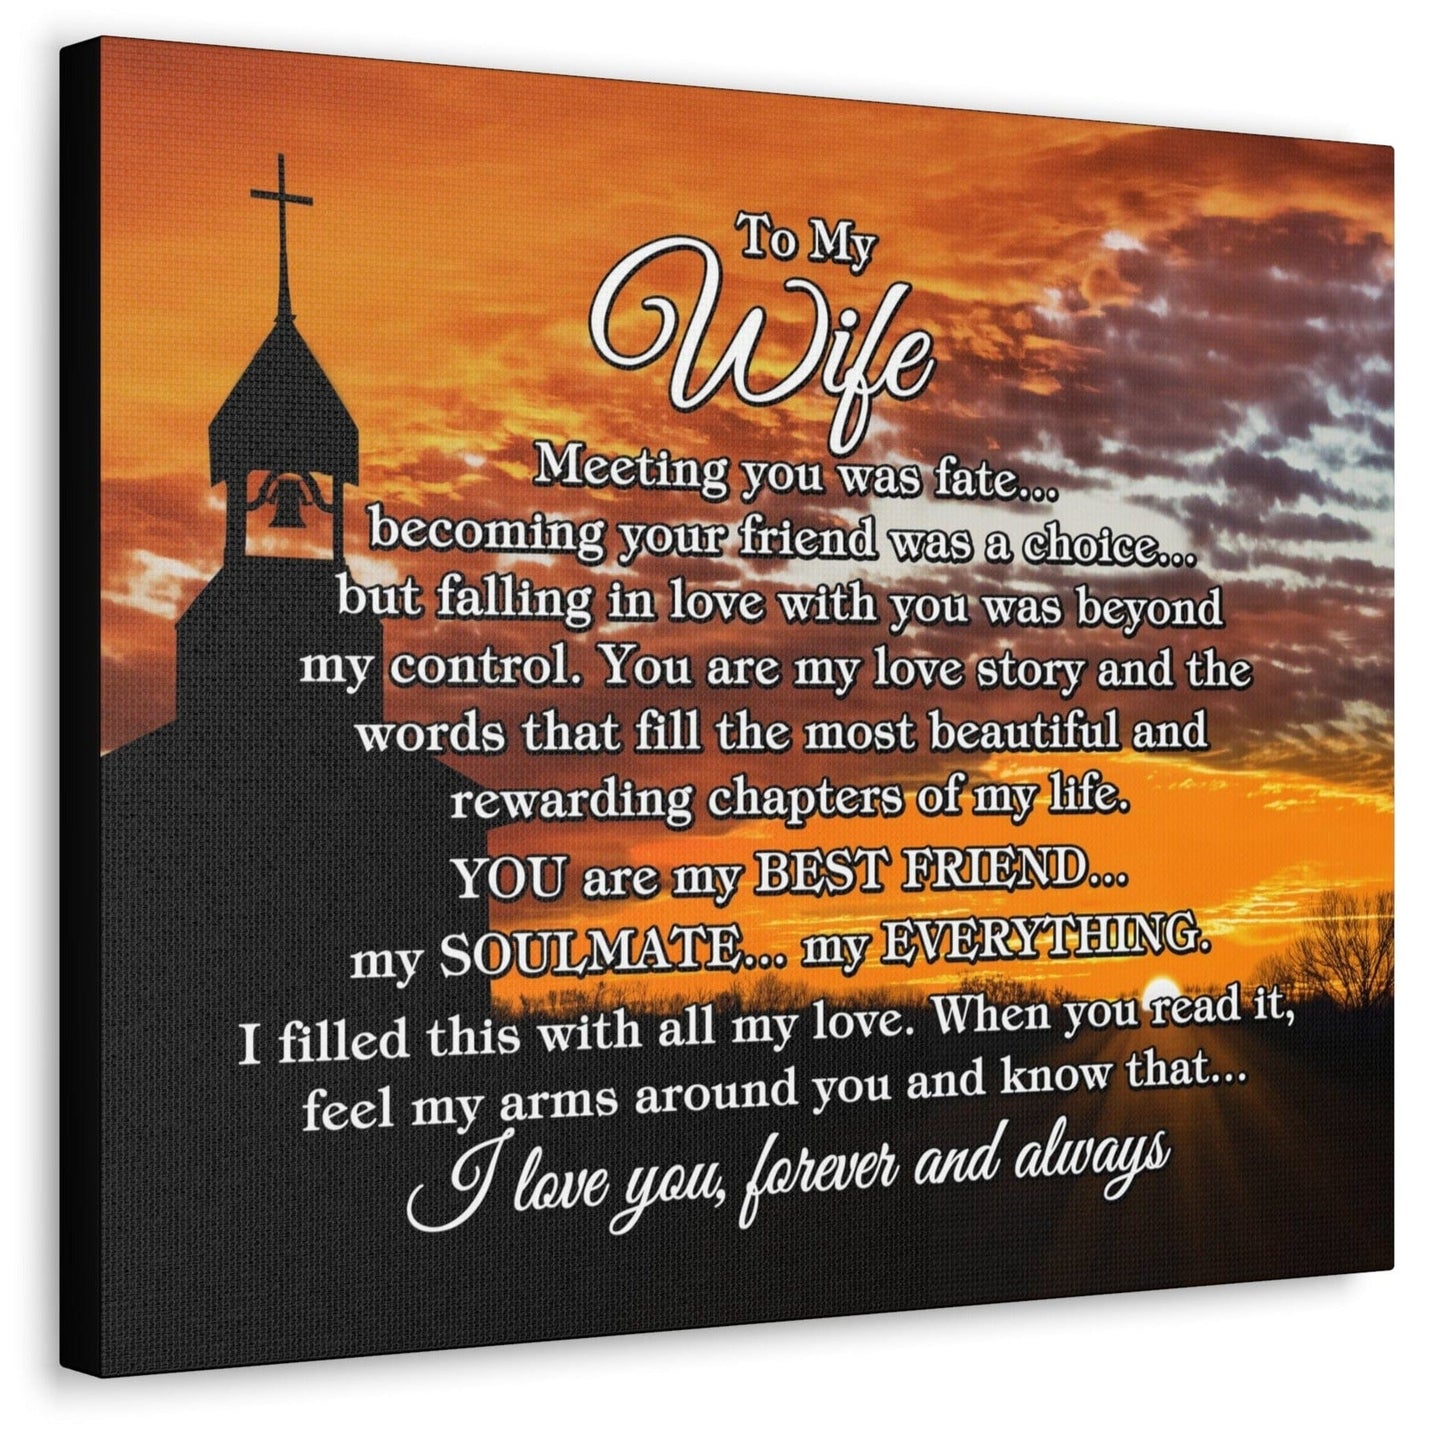 To My Wife "Meeting you was..." Canvas Gallery Wrap (Country Church Sunset)